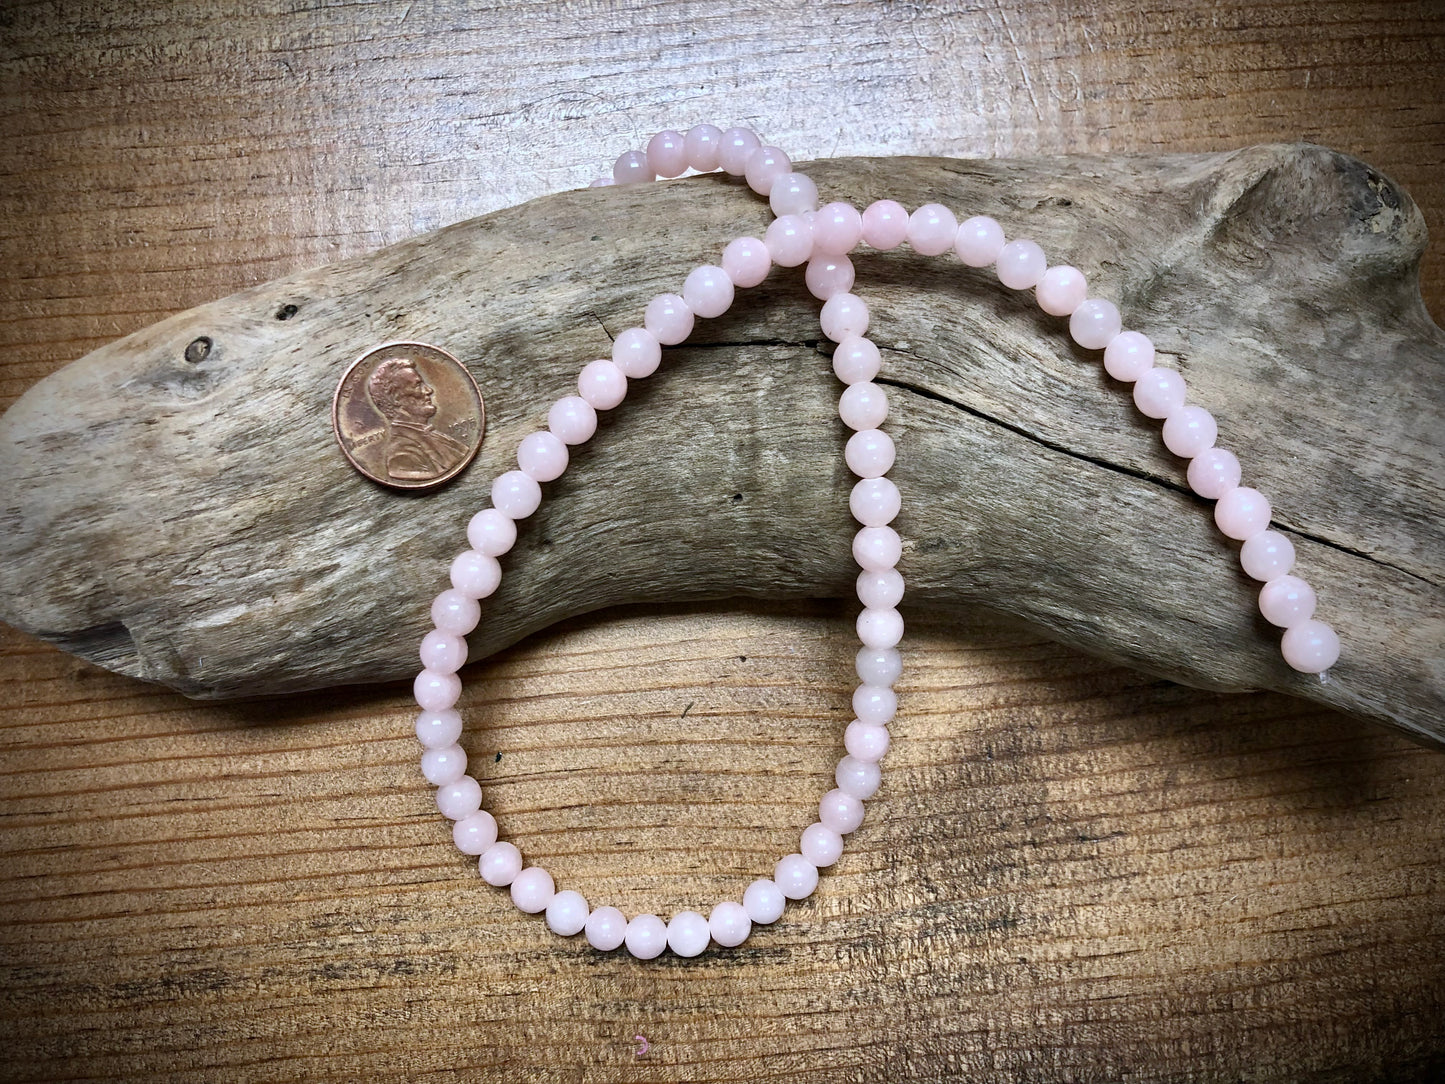 Dyed Jade Smooth Rounds - Light Pink - 6mm - 15.5"